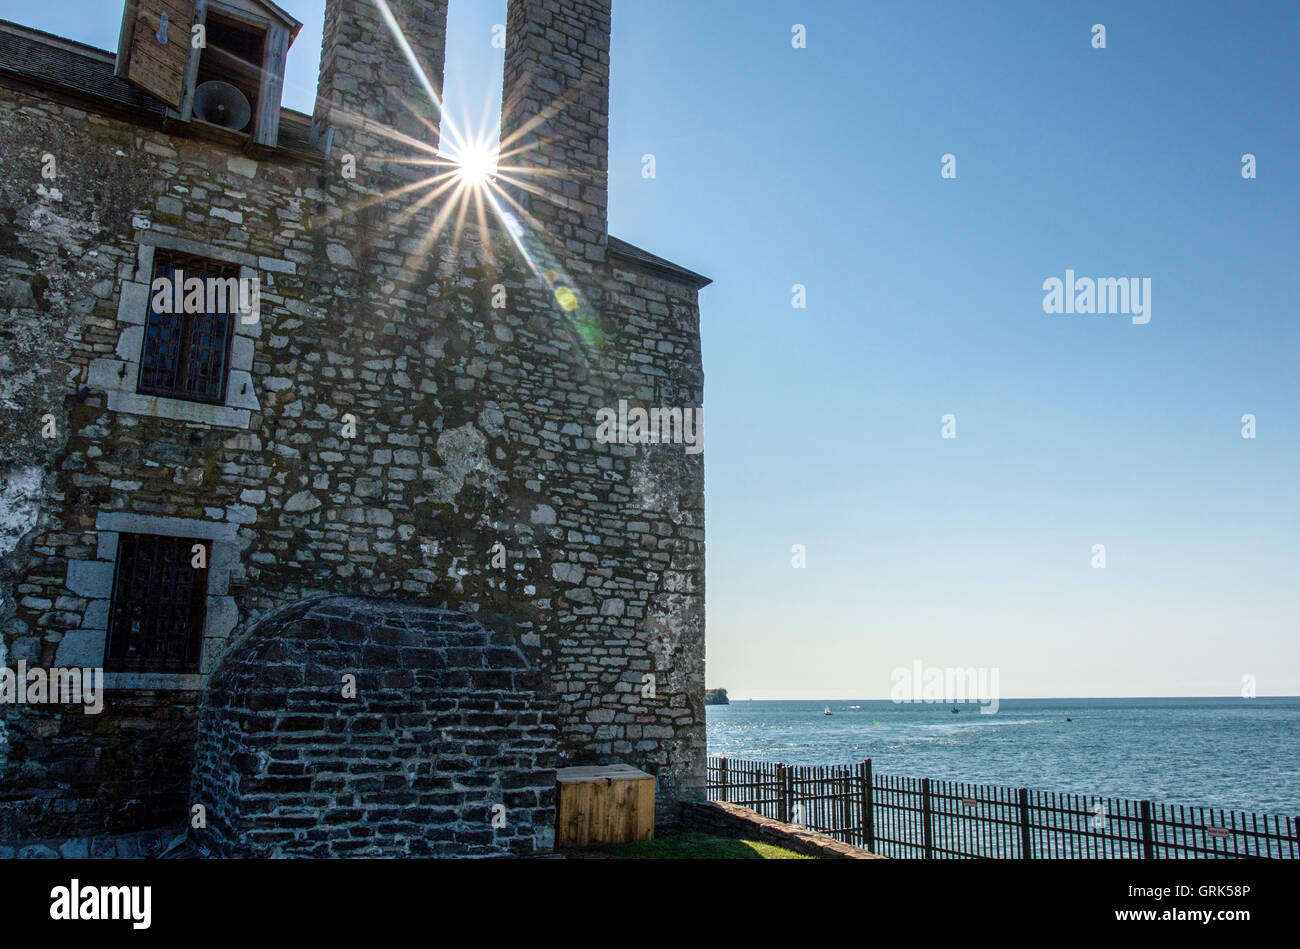 Sun flare behind the French fort at Fort Niagara, New York, on Lake Ontario at sunset. Stock Photo